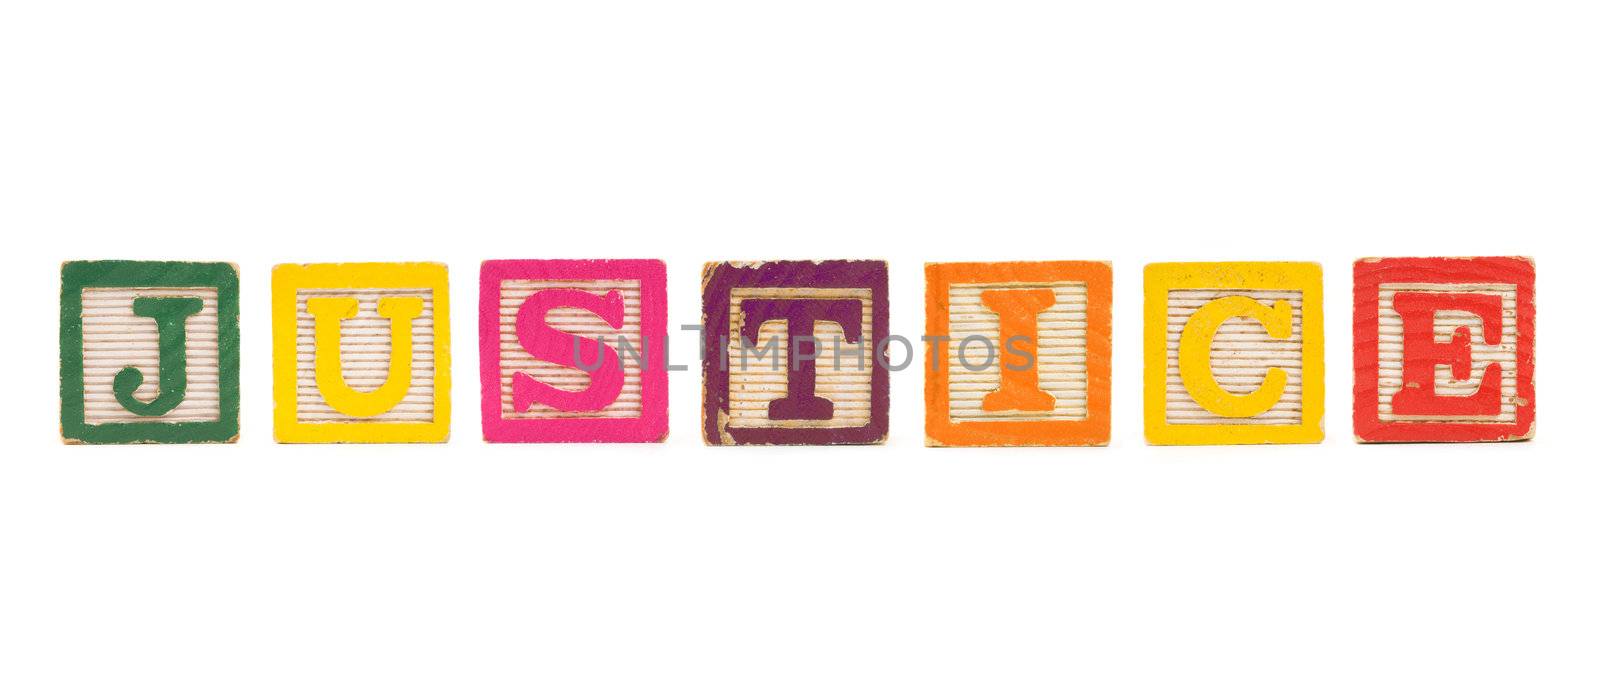 The word "JUSTICE" created with children's blocks